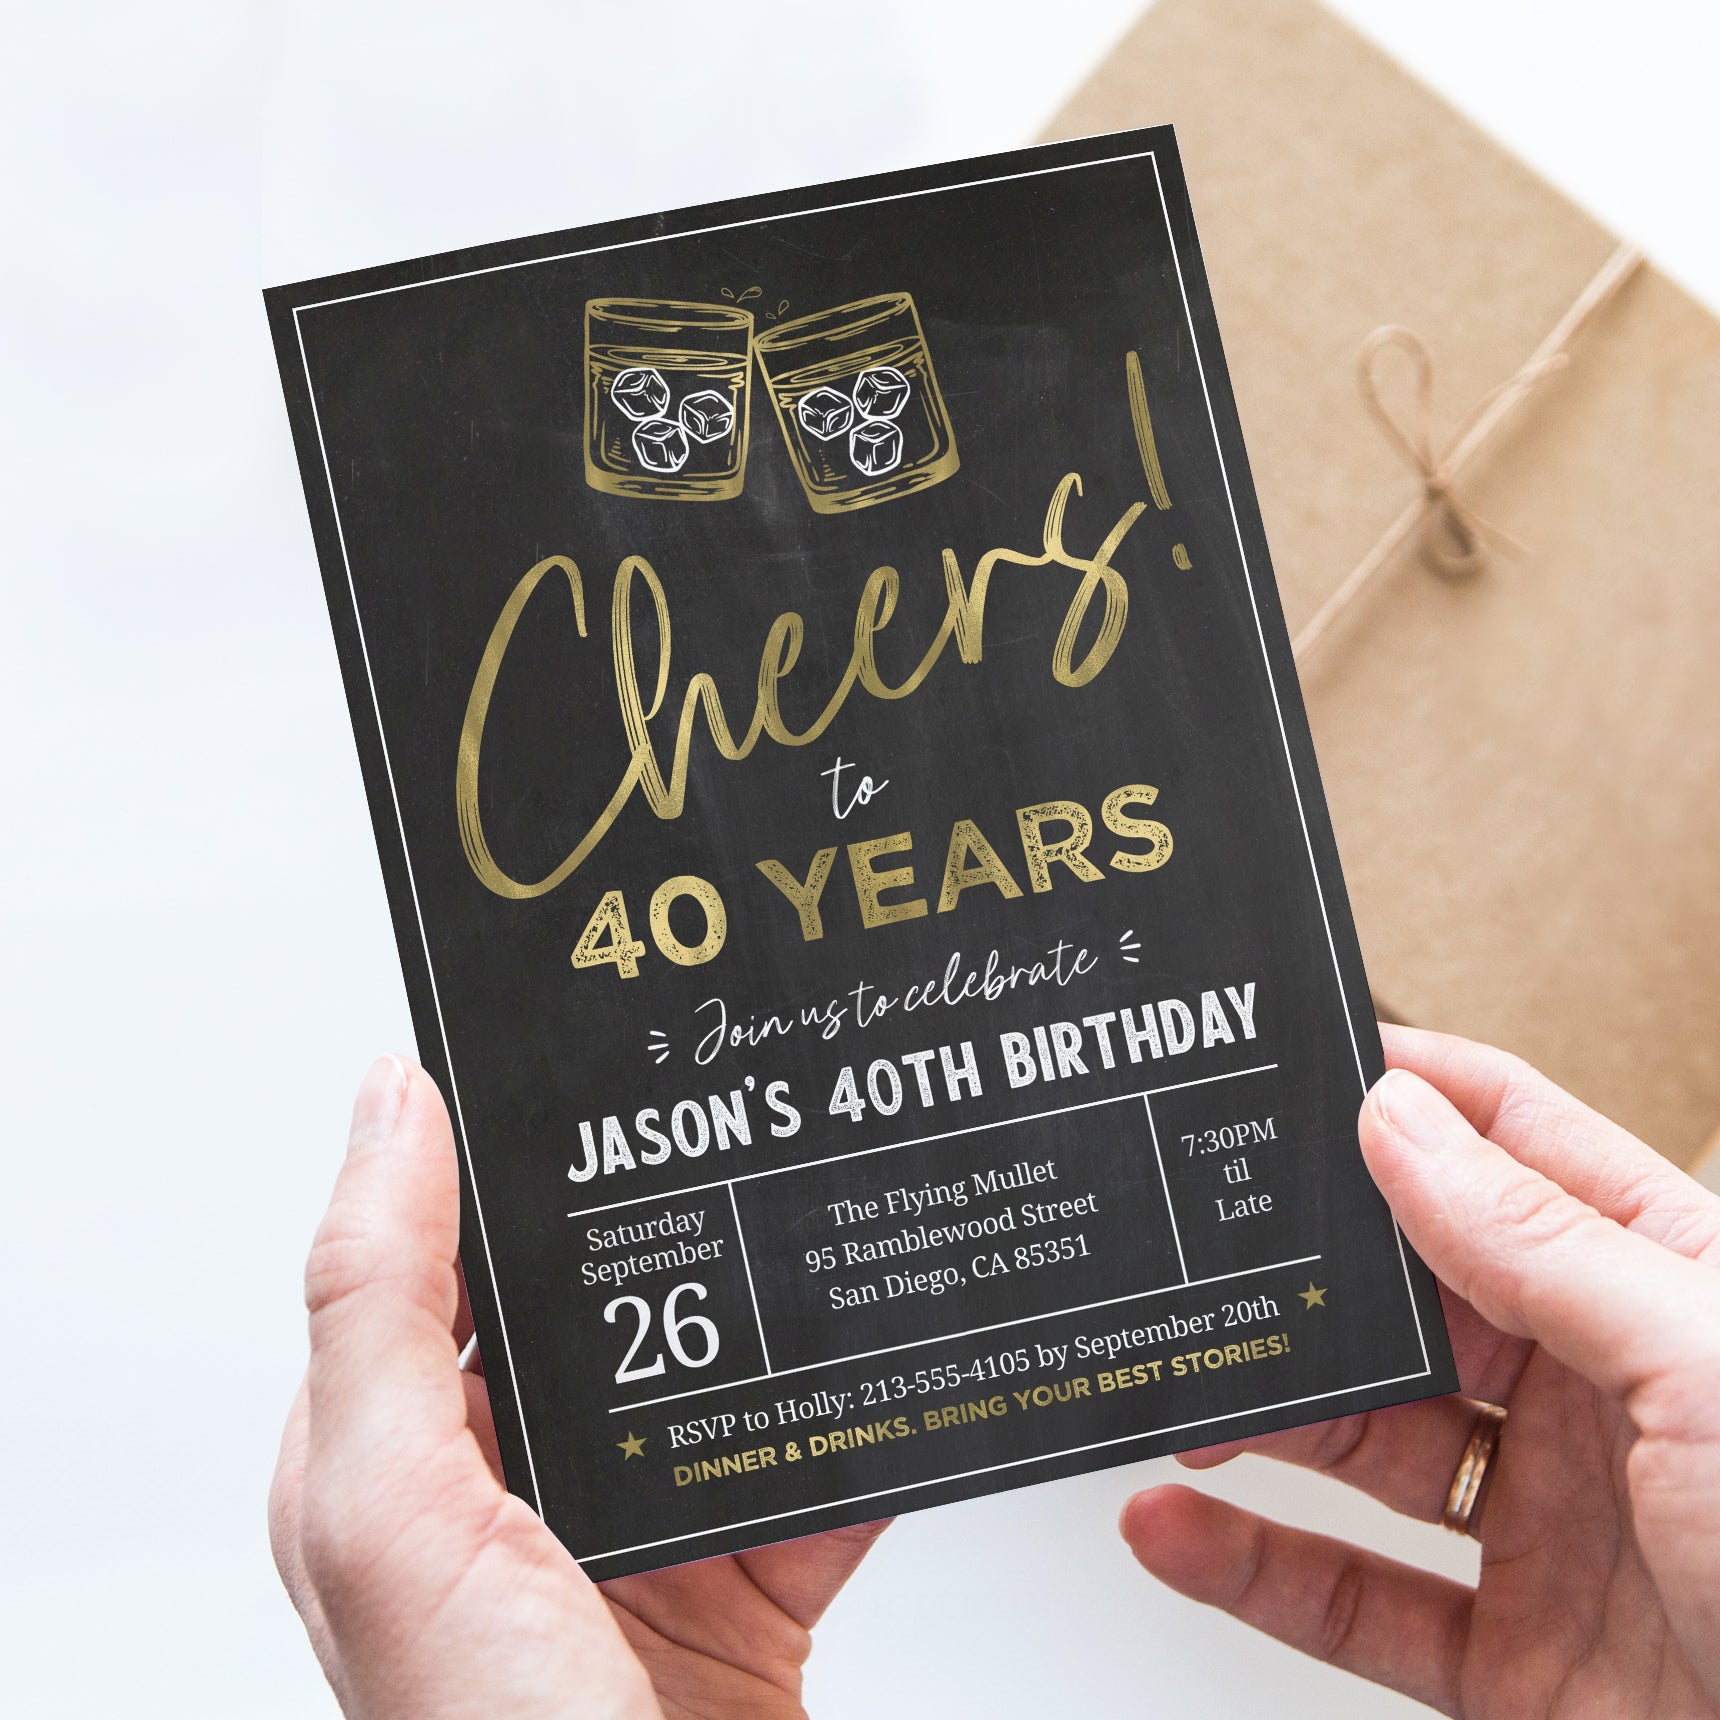 Classic "Cheers" Whiskey Birthday Invitation for Him